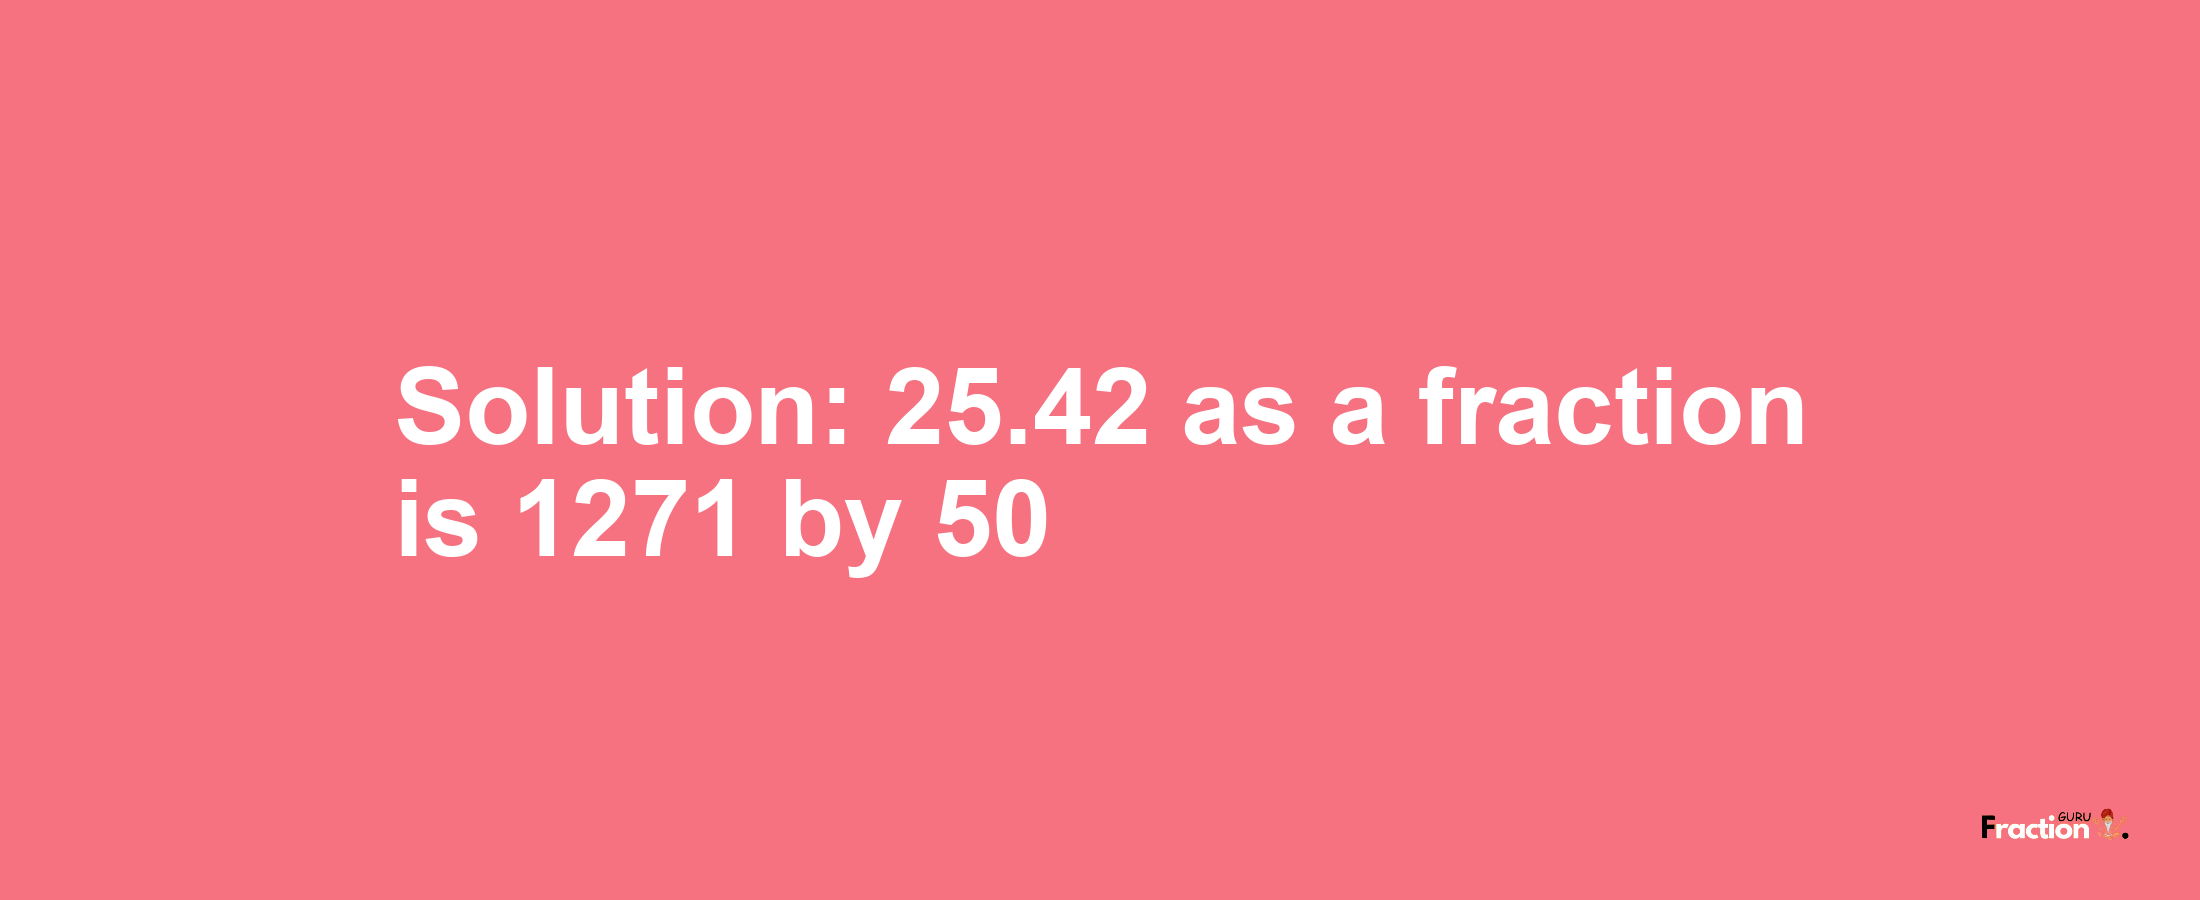 Solution:25.42 as a fraction is 1271/50